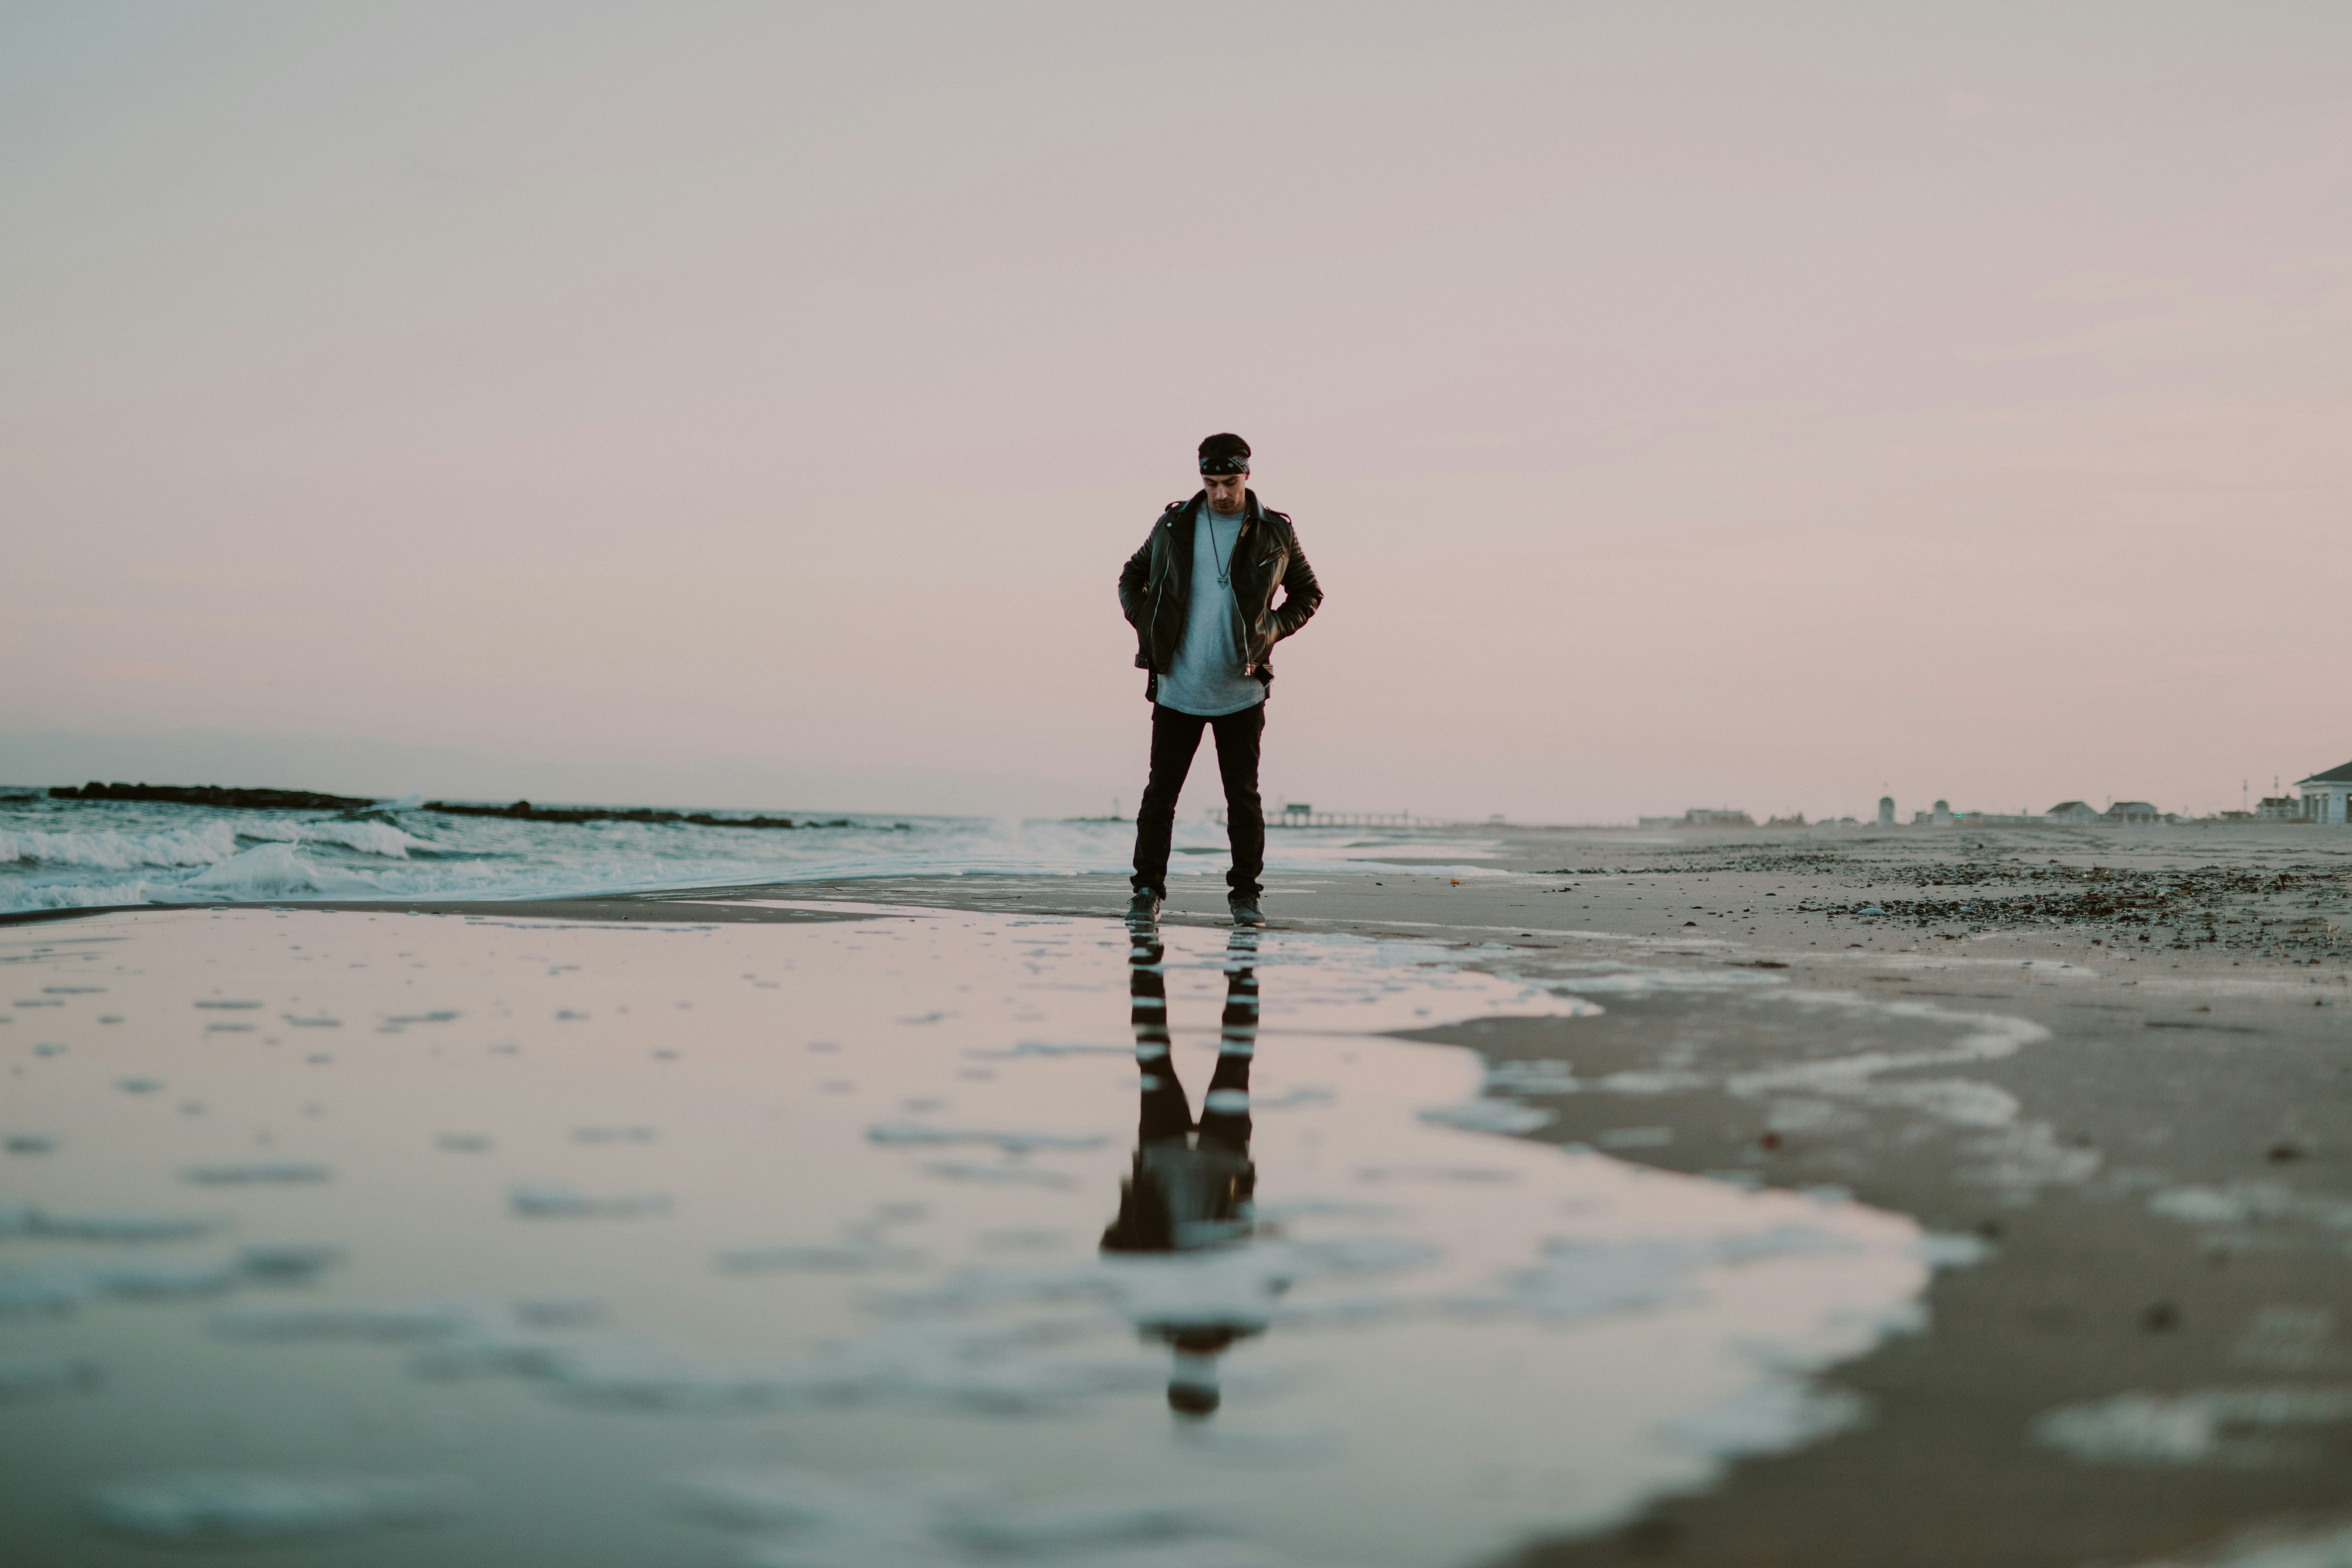 photography of man standing near water body